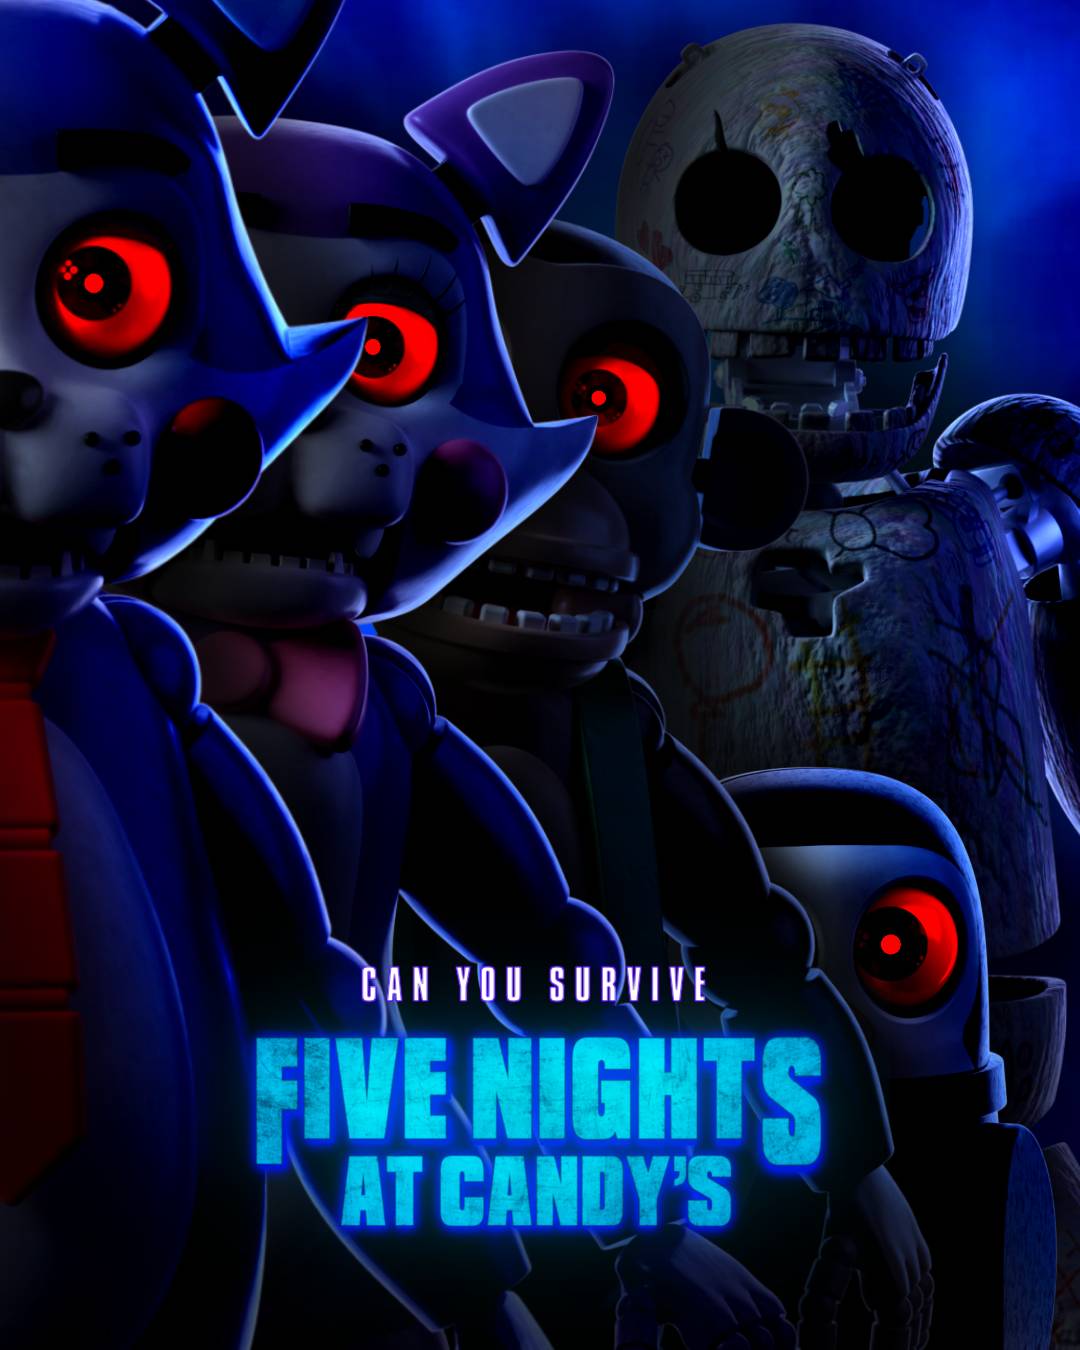 Five nights at Candy's movie poster by EMan135 on DeviantArt